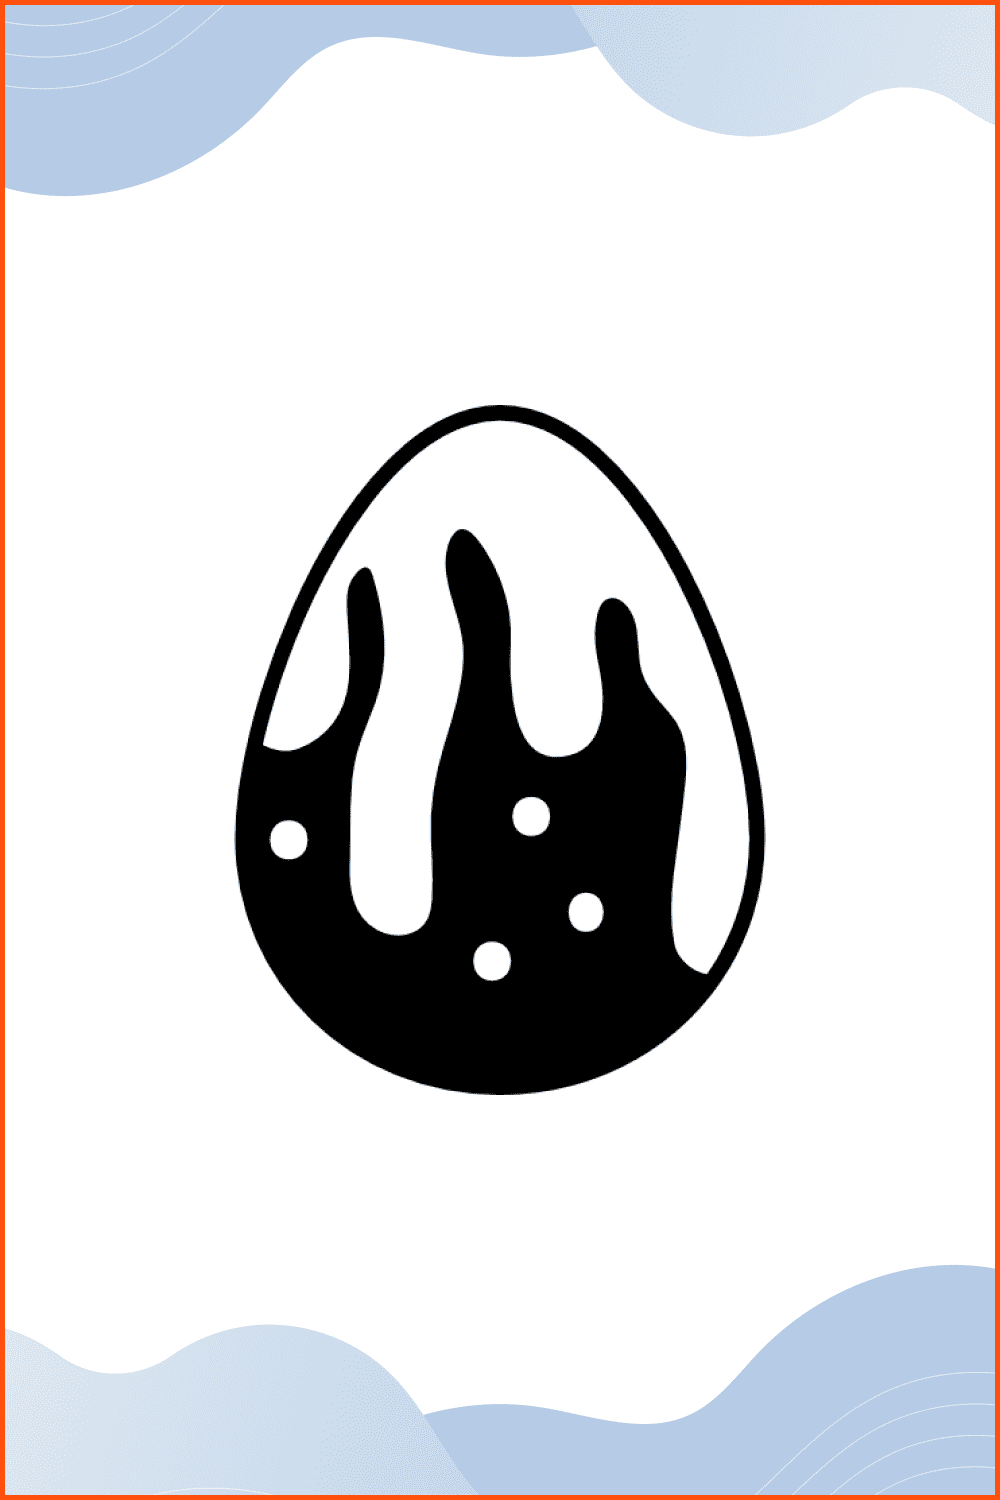 Free icon easter egg of dark chocolate with white chocolate melting on it.